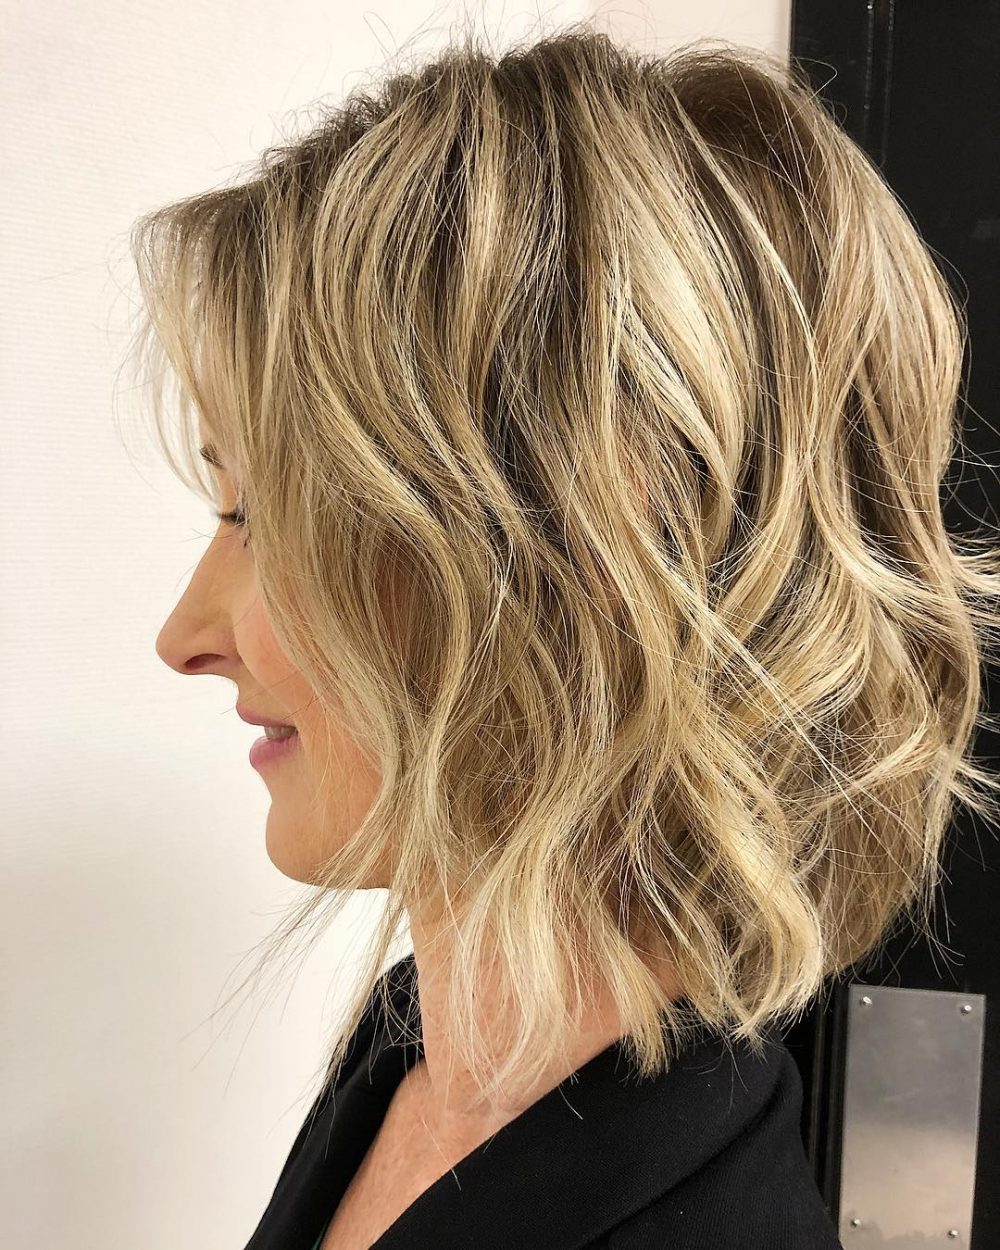 41 Perfect Short Hairstyles For Fine Hair 2018 Trends